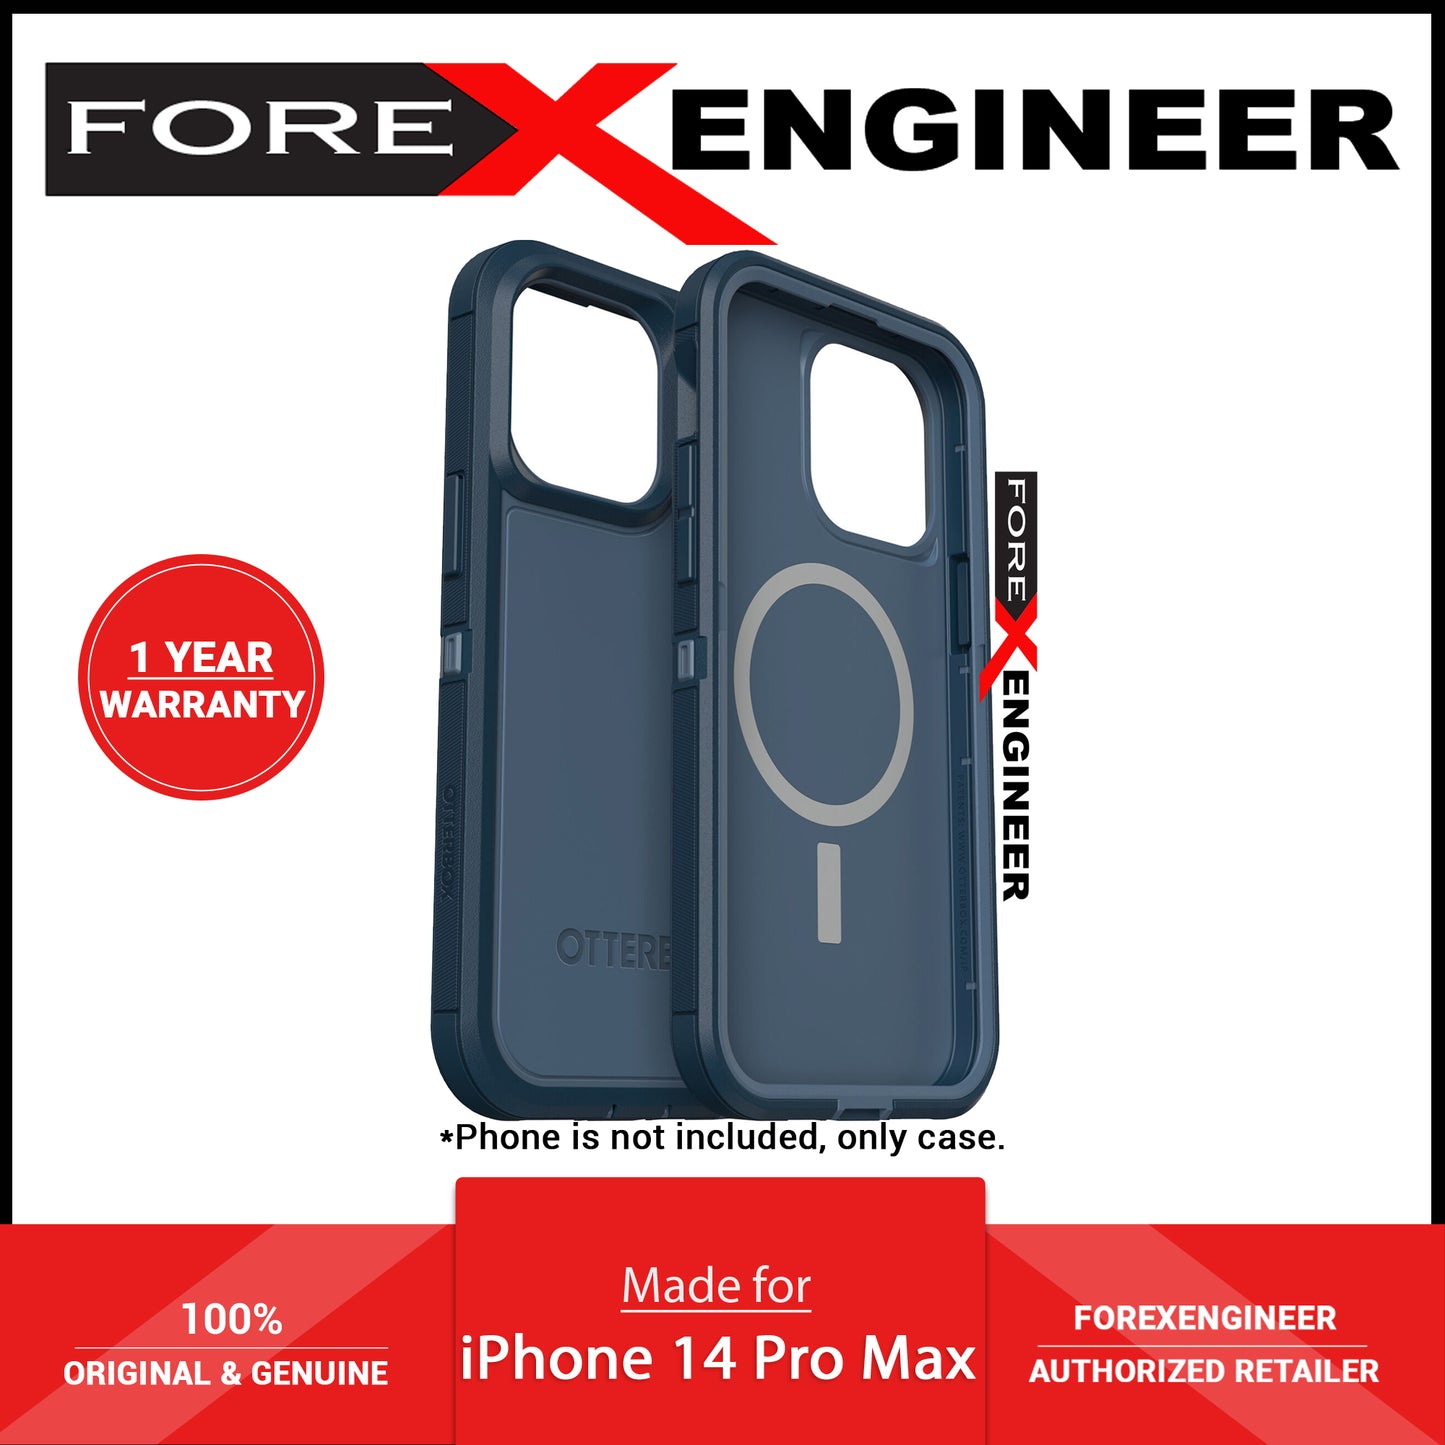 Otterbox Defender Pro XT for iPhone 14 Pro Max - Open Ocean (Barcode: 840262387484 )